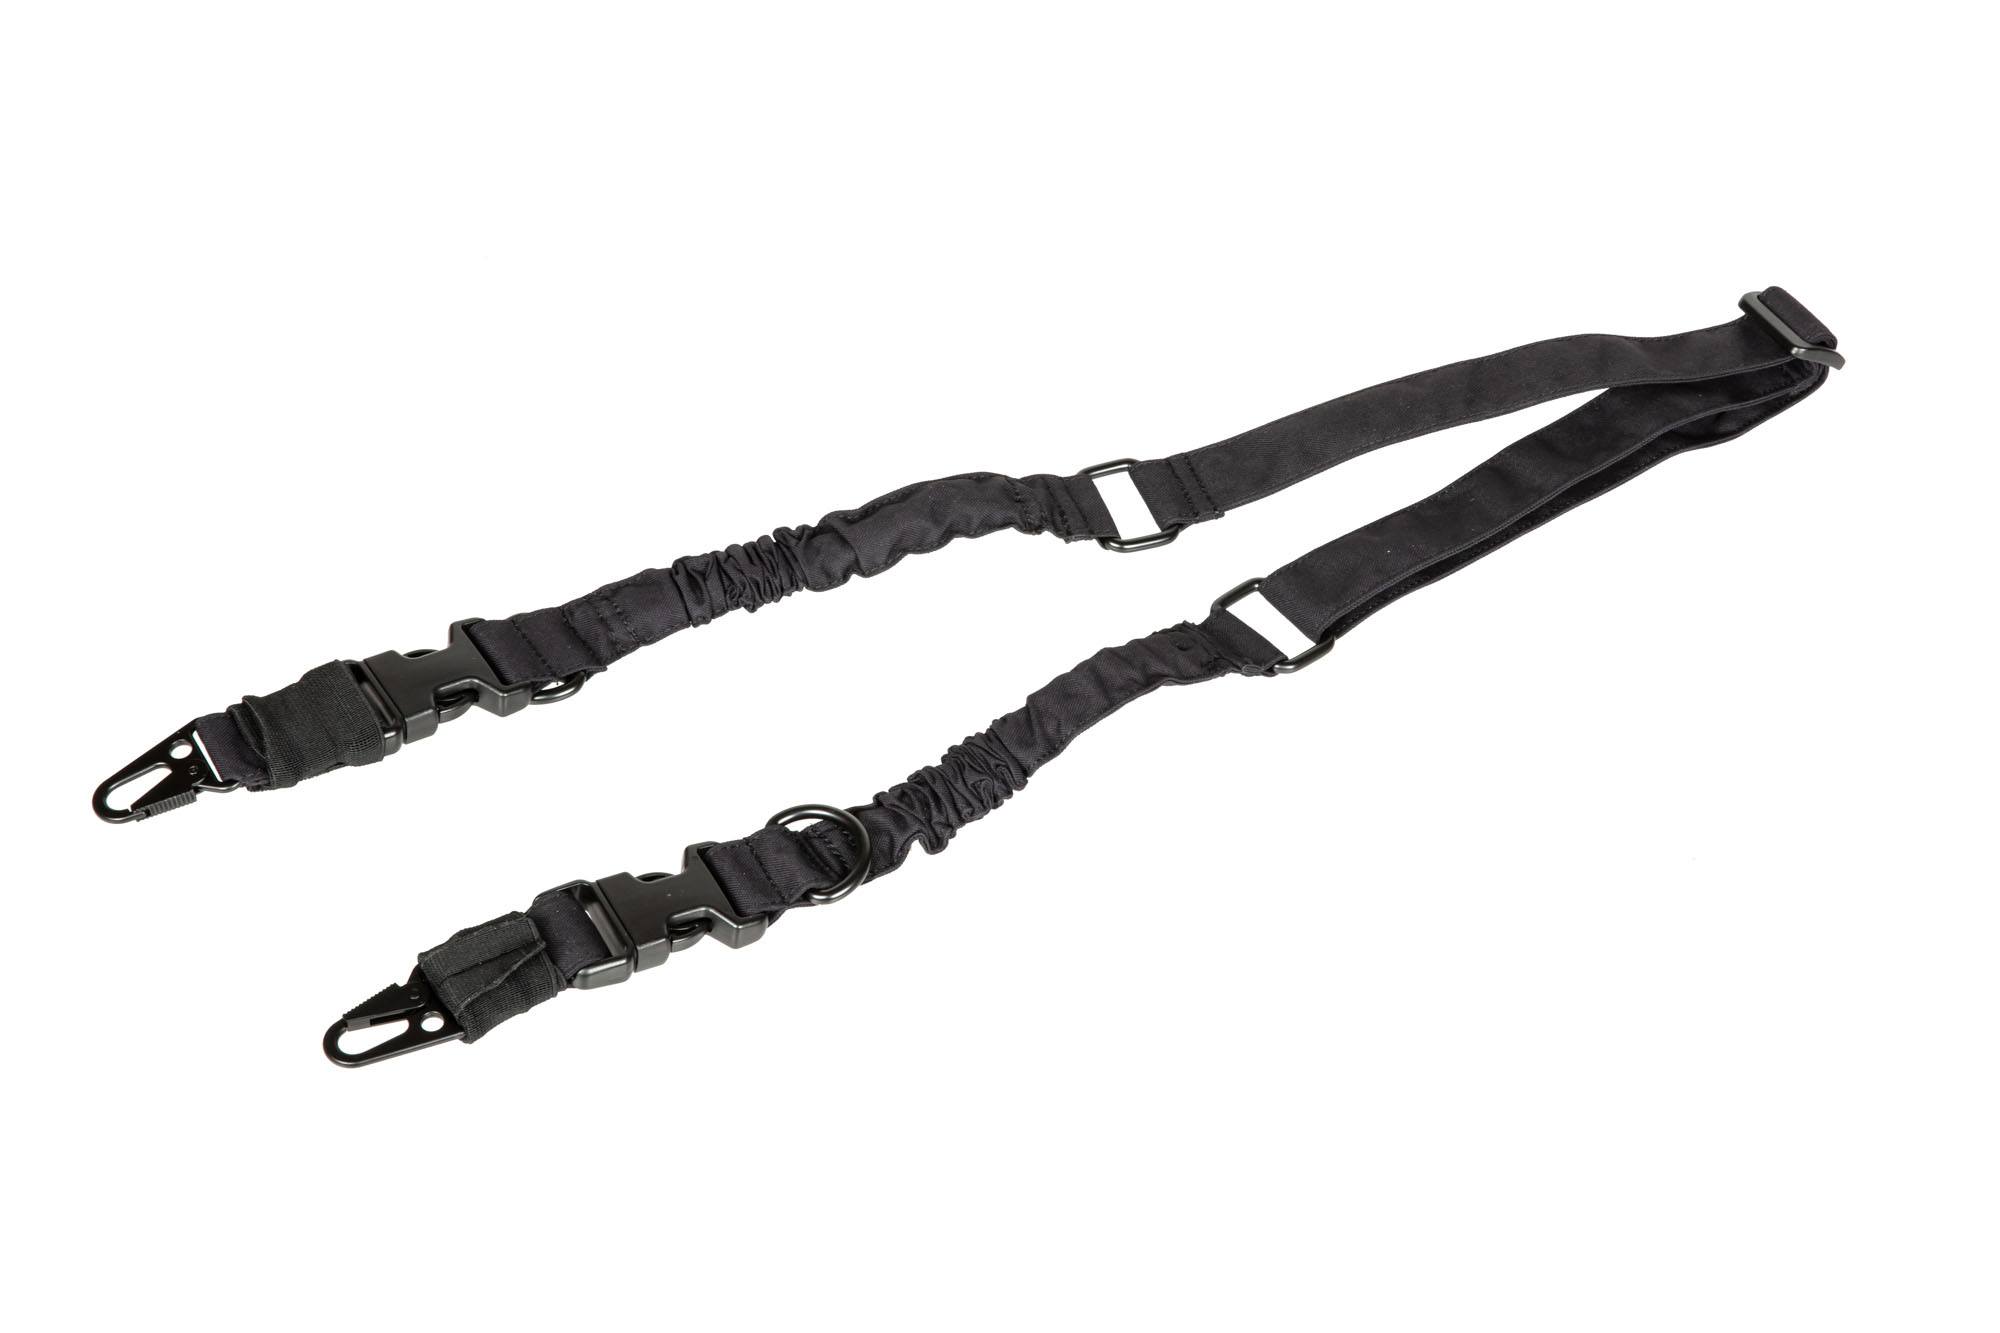 2-point bungee sling Acodon - Black